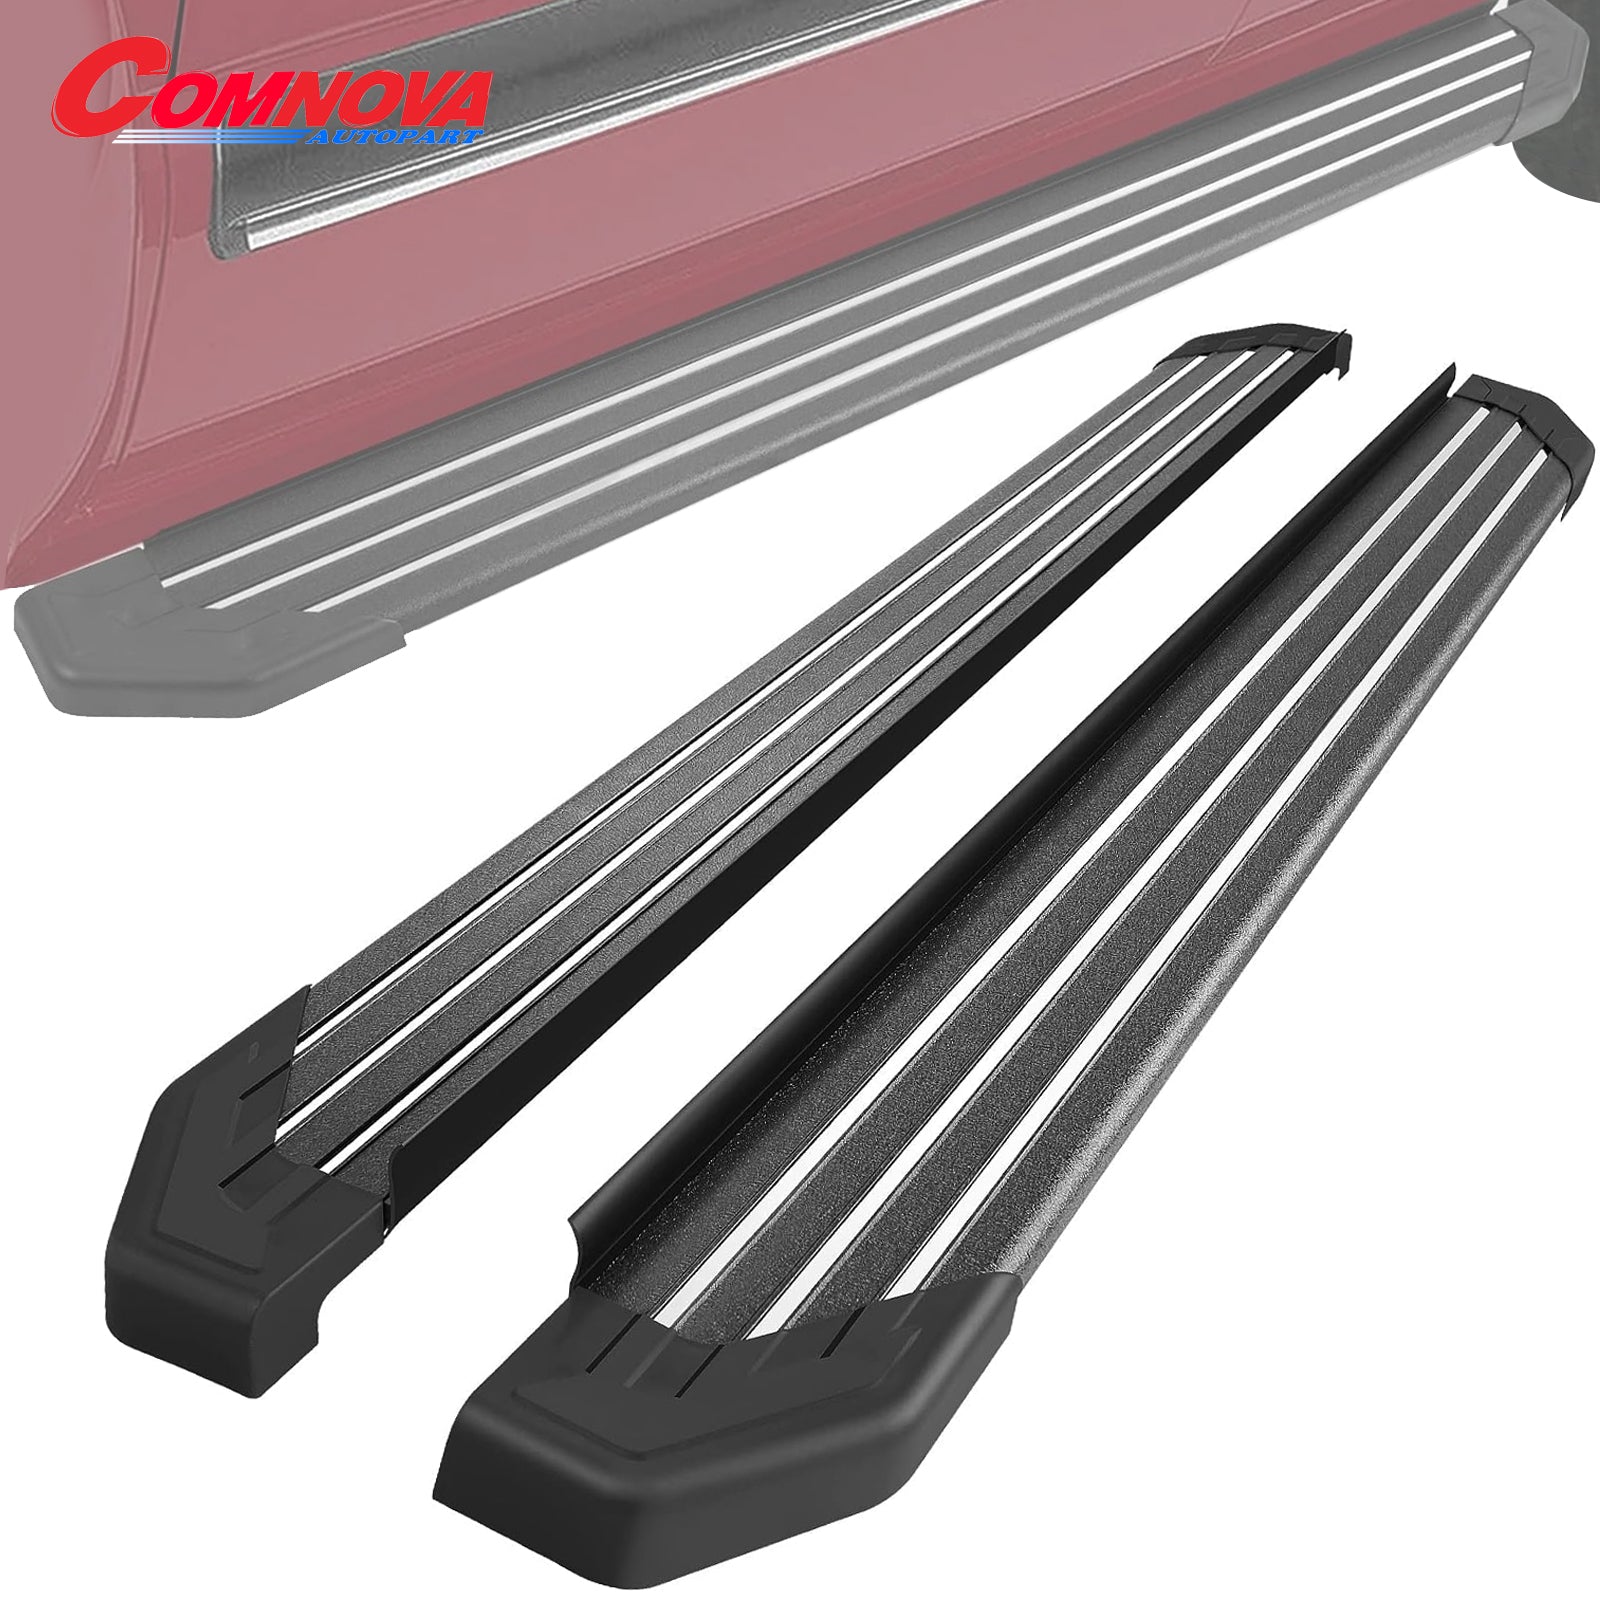 5.5Inch Aluminum Running Boards Compatible with 2018-2023 Chevy Traverse/Buick Enclave. C73 Style. - COMNOVA AUTOPART